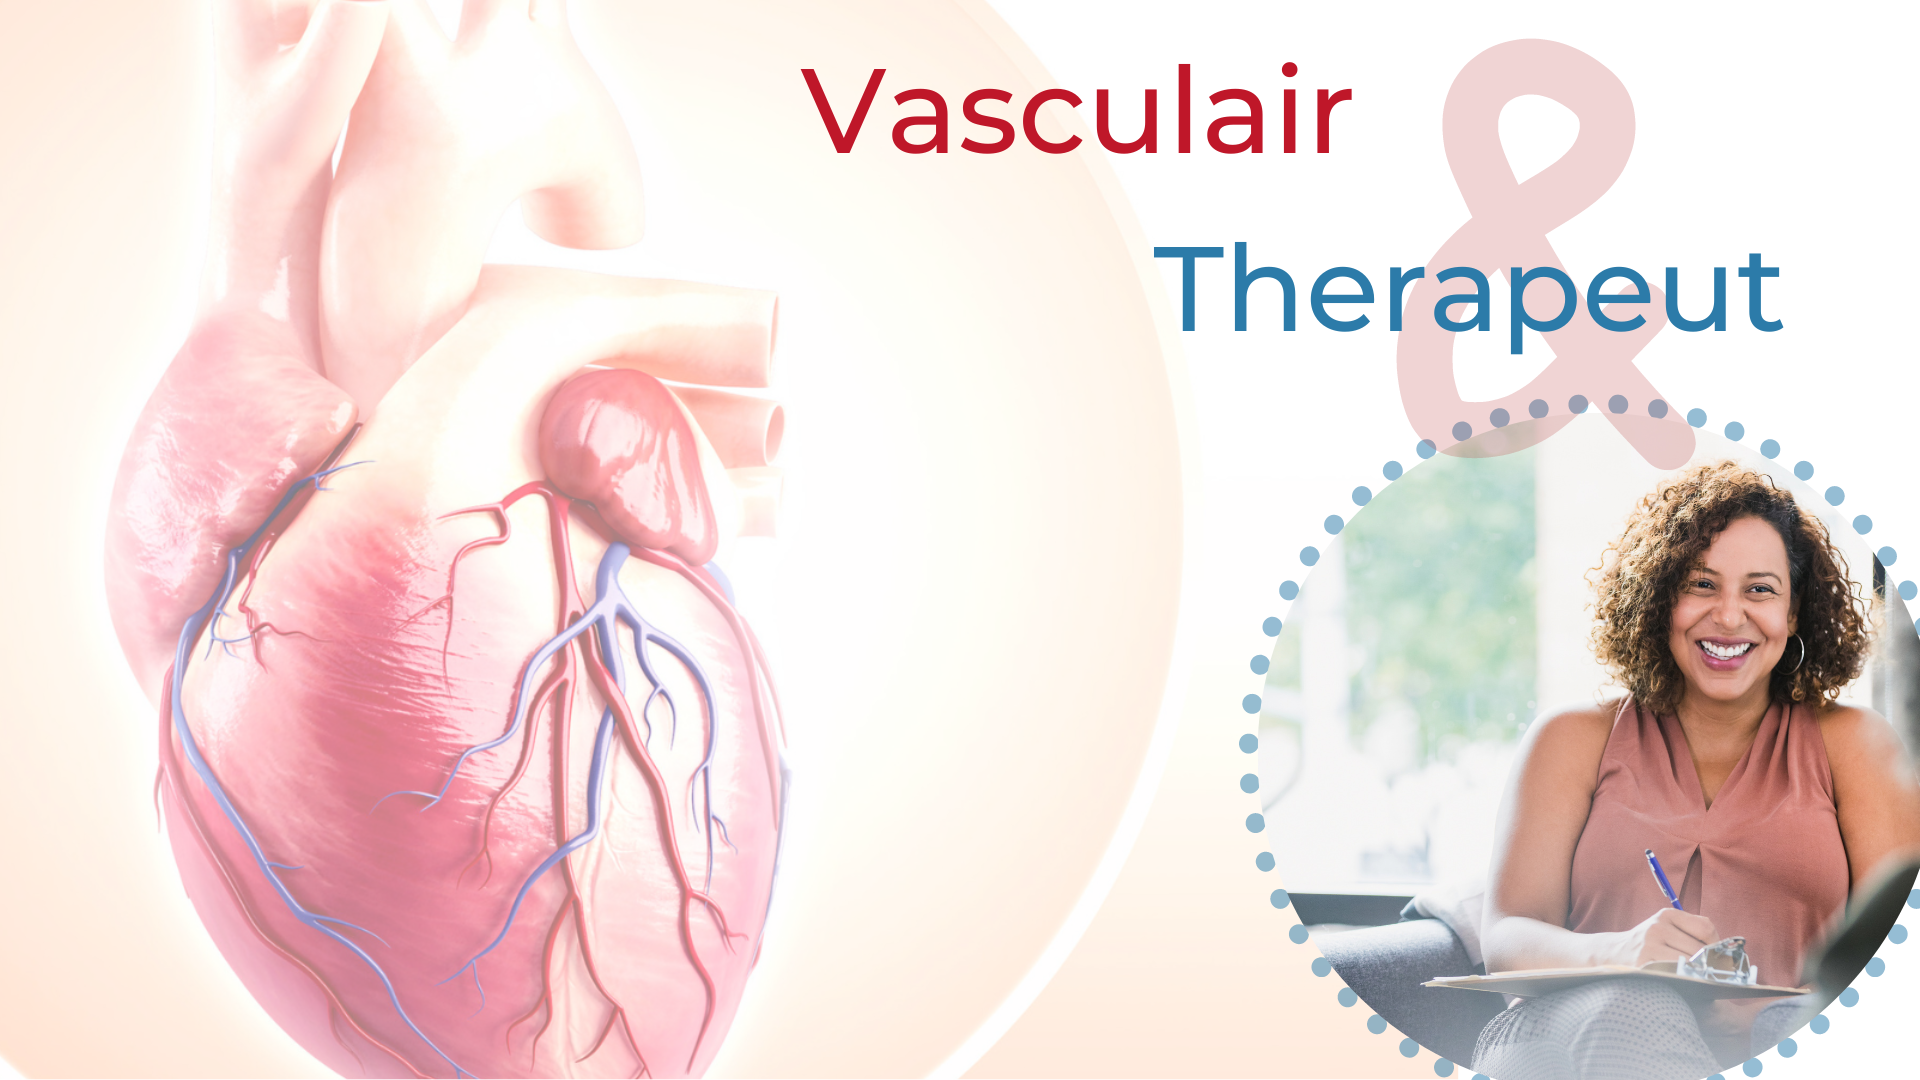 Vasculair therapeut afbeelding website.png